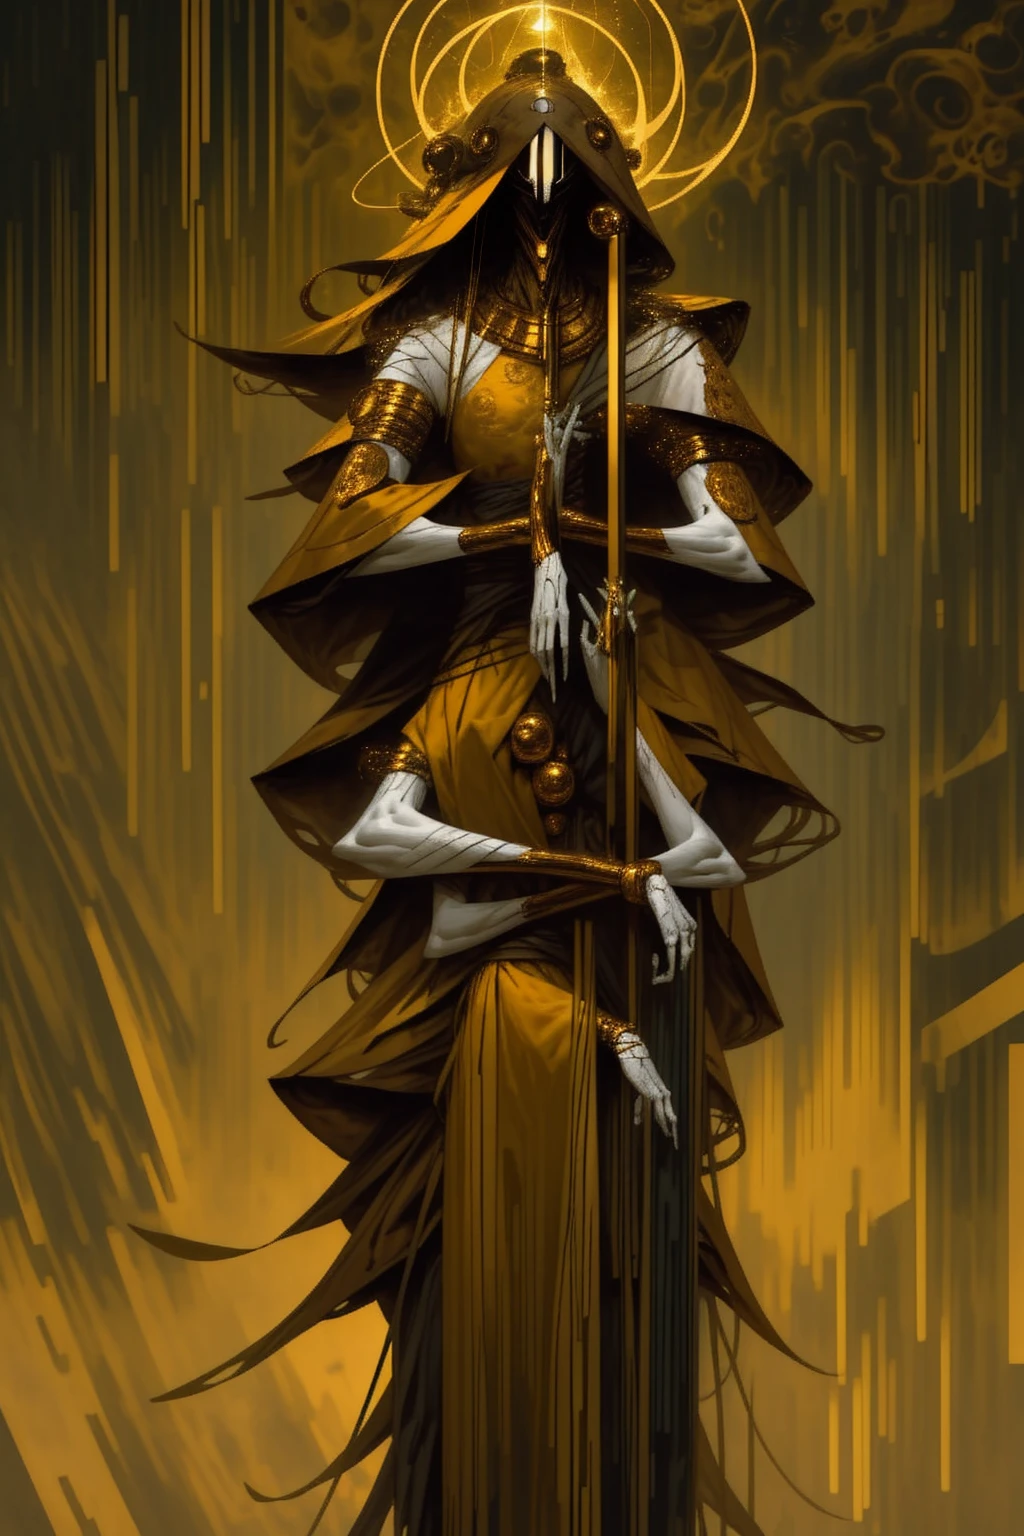 a tall menacing figure, wide shoulders, frail body, gaunt, body is withering/decaying, covered head to toe in a tattered yellow cloak, tattered yellow hood over the head, scrappy yellow veil hanging over entire face, face completely (concealed), old yellow stained bandage wraps loosely cover arms, many golden bangles loosely hanging off both forearms, covered in golden jewelry, old decrepit hands, a giant golden sunset behind them, decaying entity, flowing yellow cloak over entire body, divine being, cosmic horror